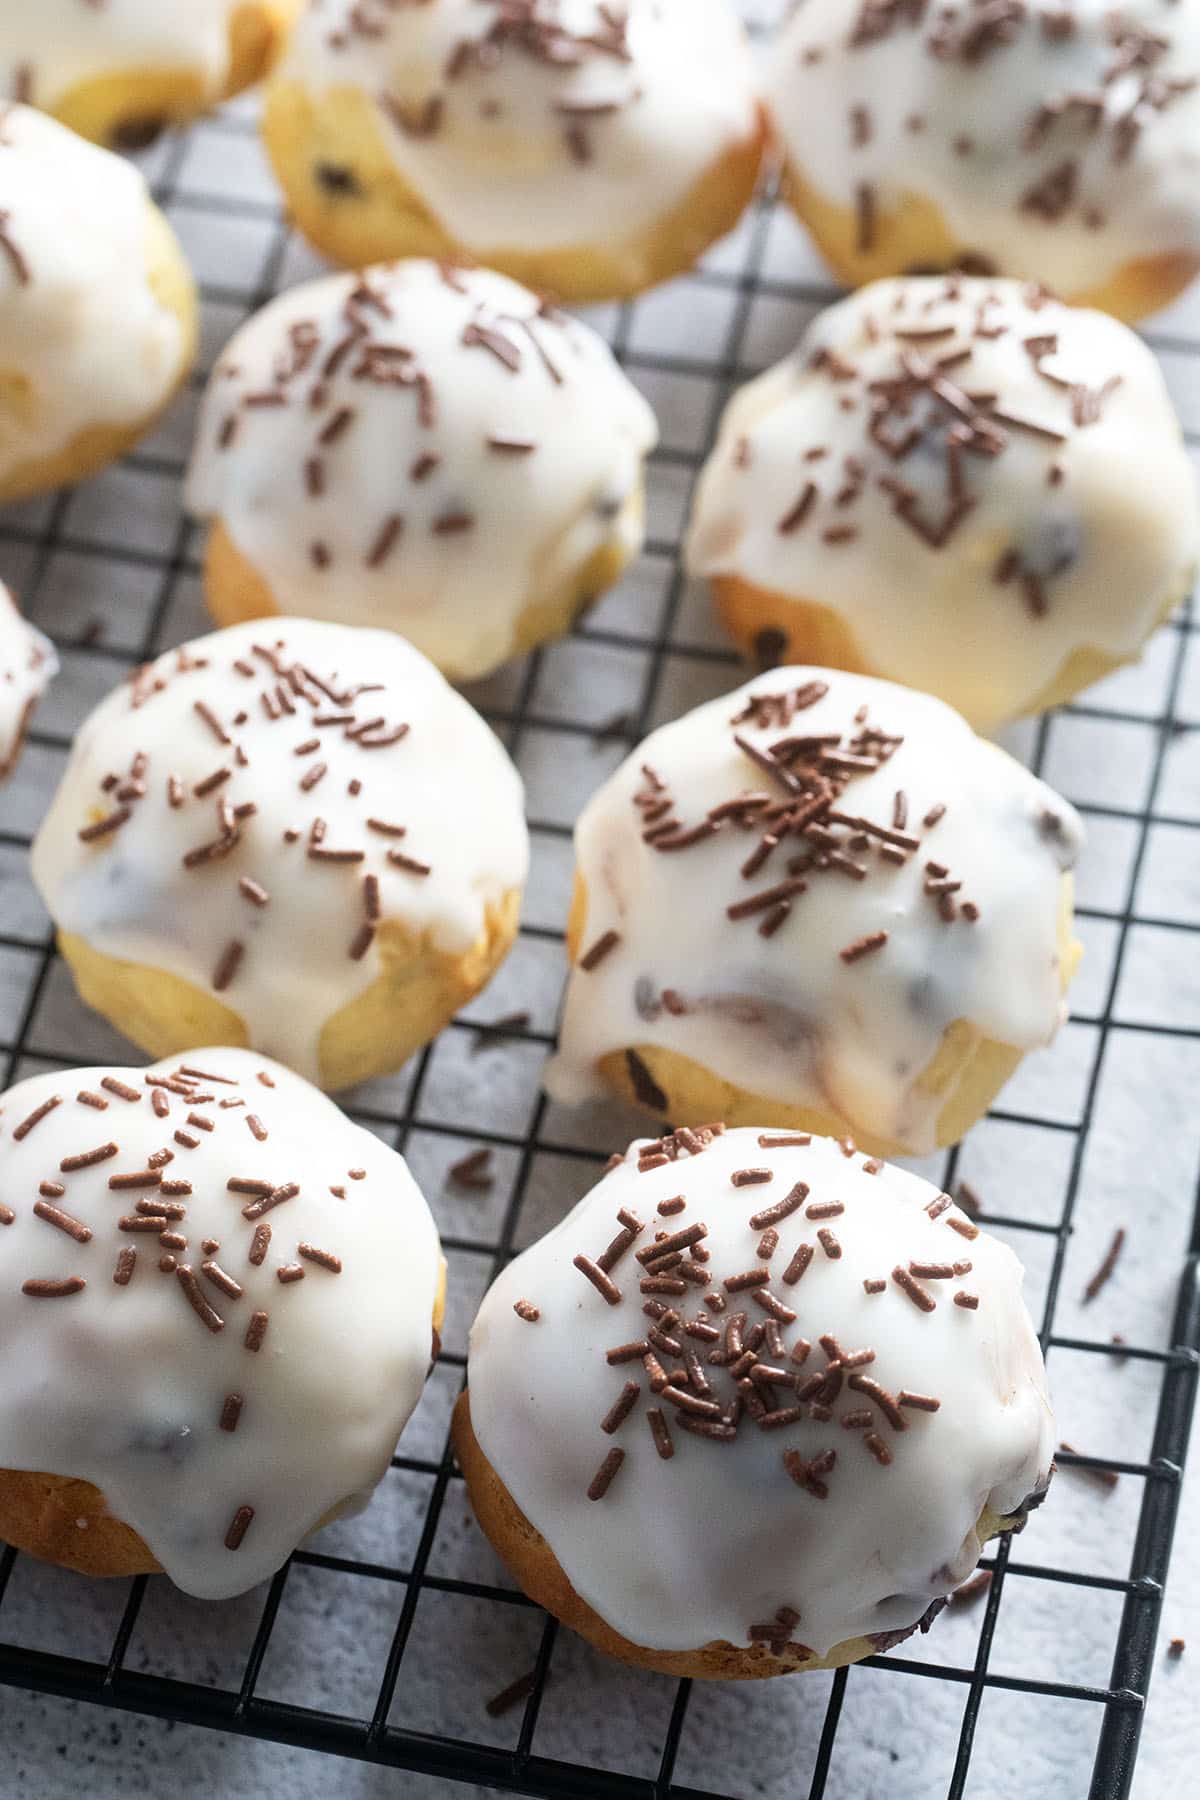 many glazed ricotta cookies sprinkled with chocolate on a wire rack.